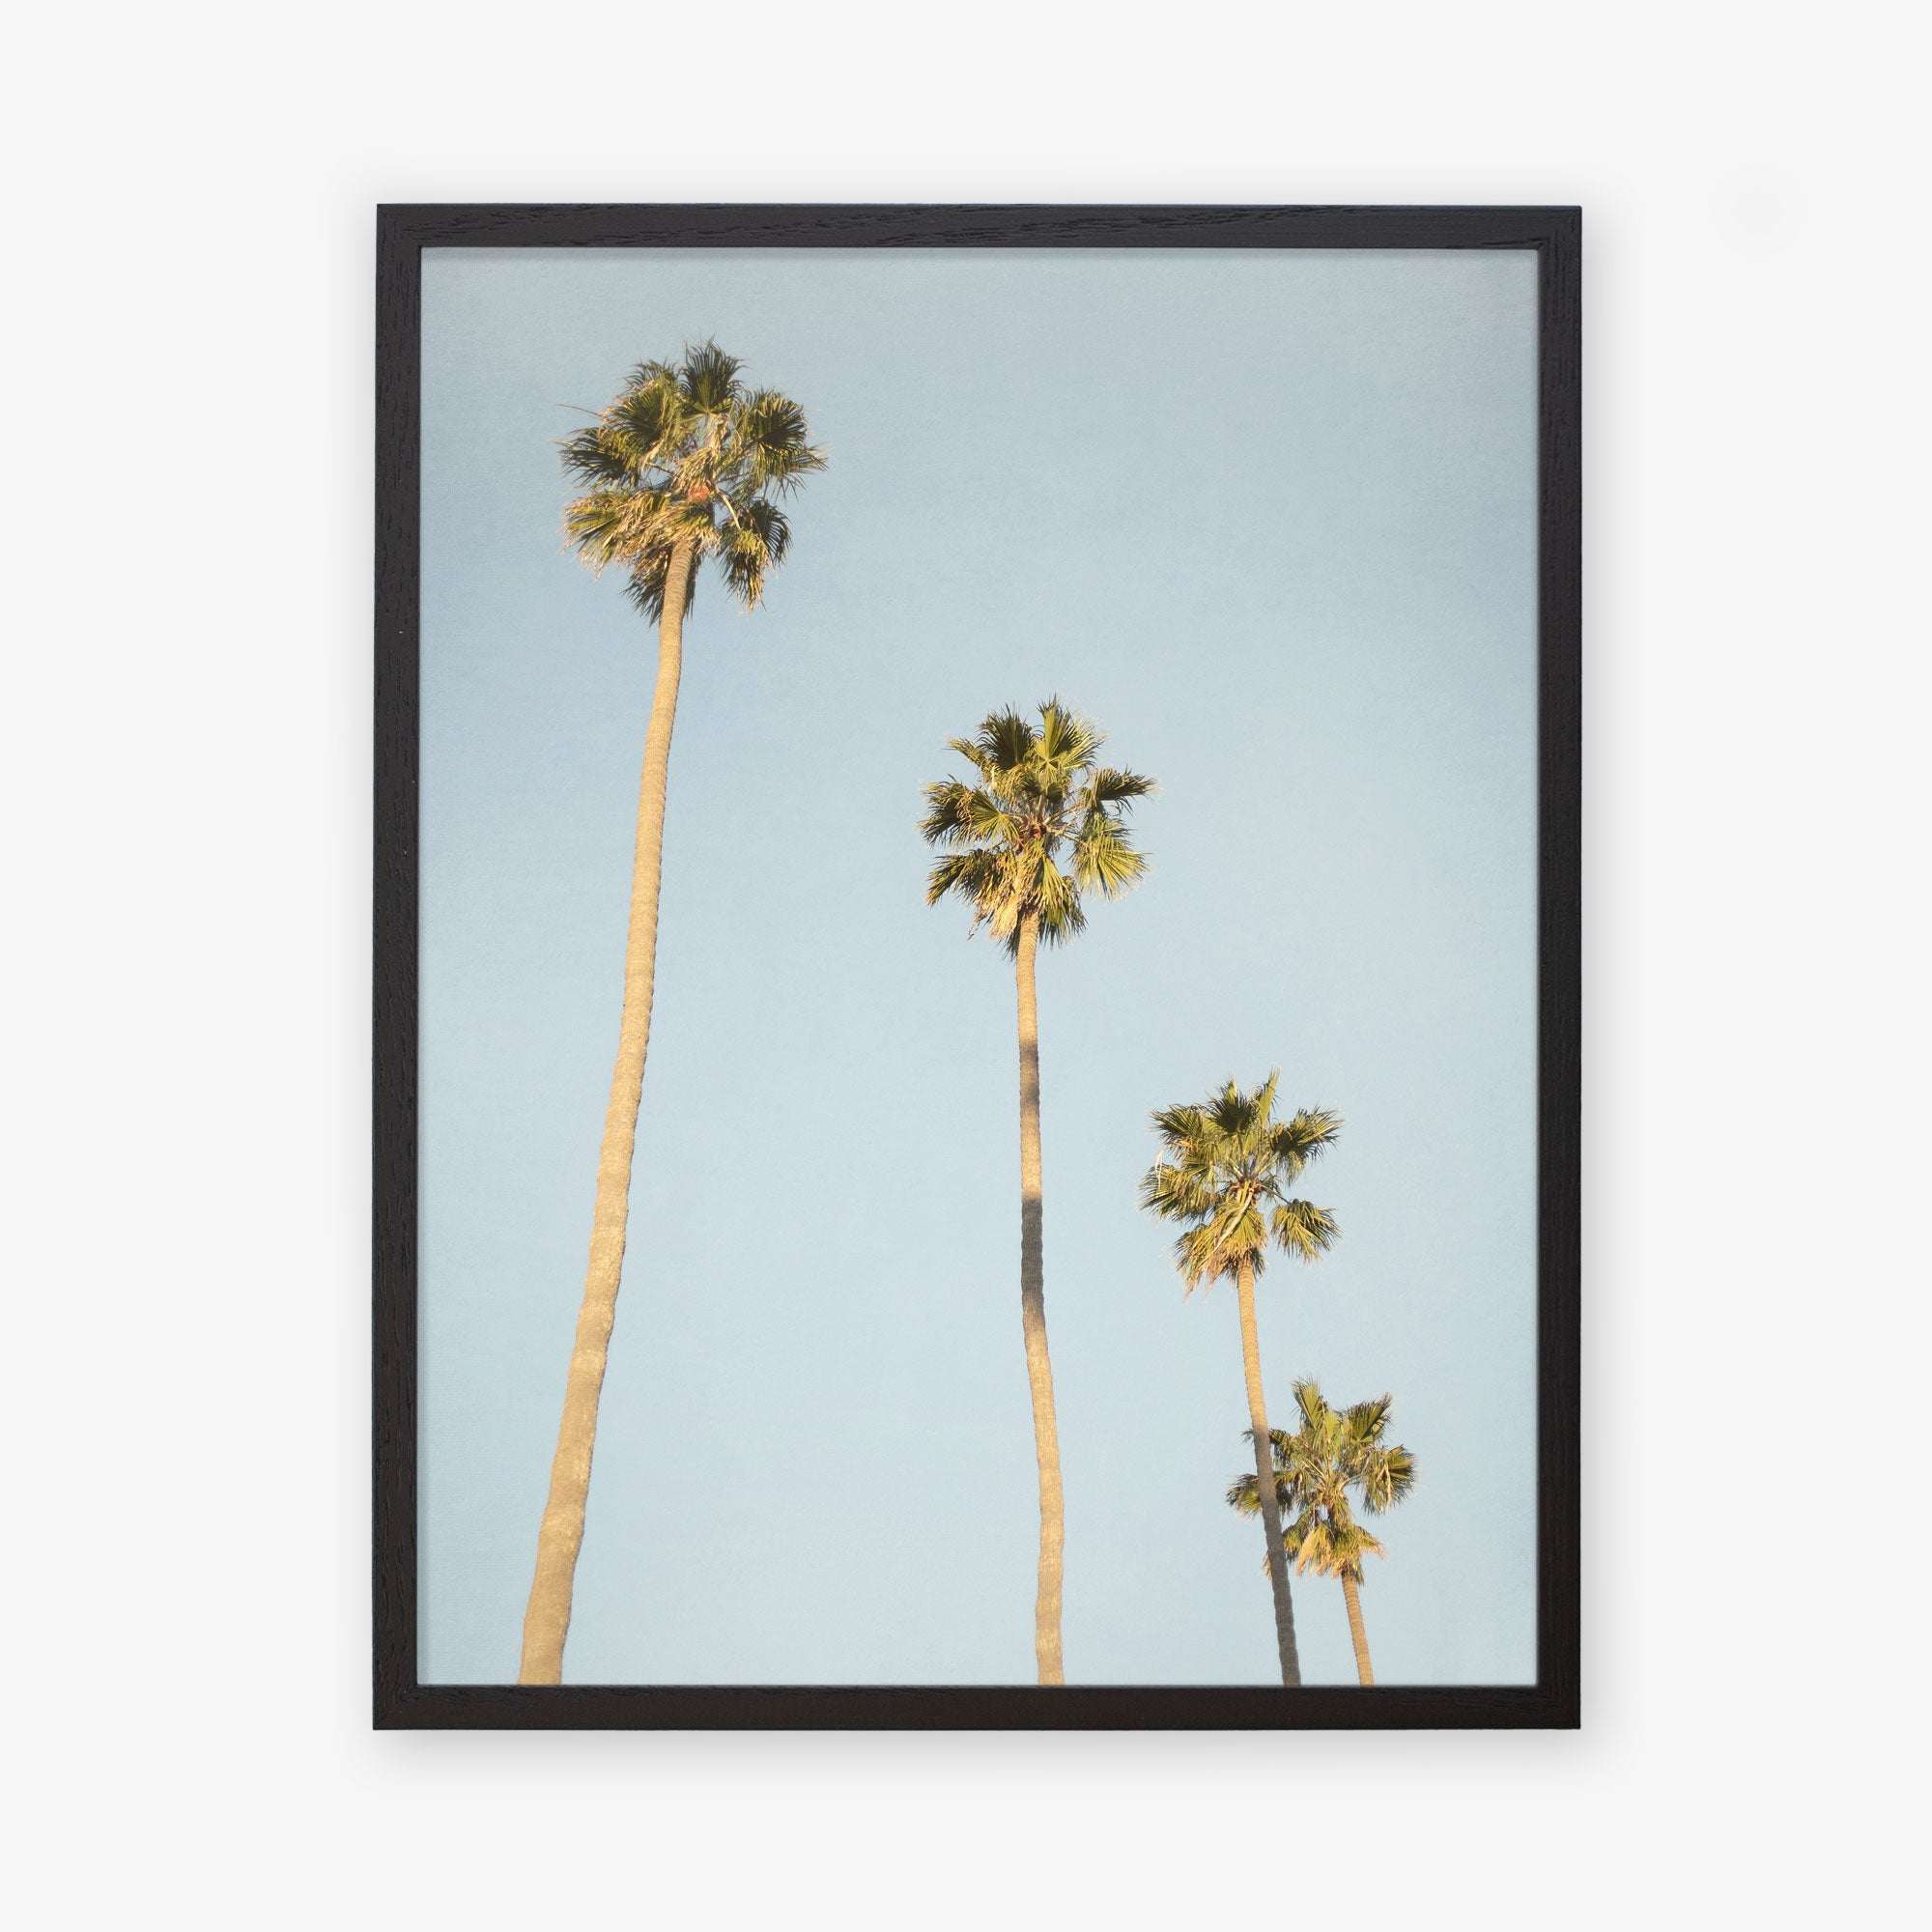 Framed photo depicting five tall palm trees against a clear California sky, artistically arranged with varying heights and lush green tops - Offley Green&#39;s Los Angeles Palm Tree Photographic Print &#39;Palm Stairs to Heaven&#39;